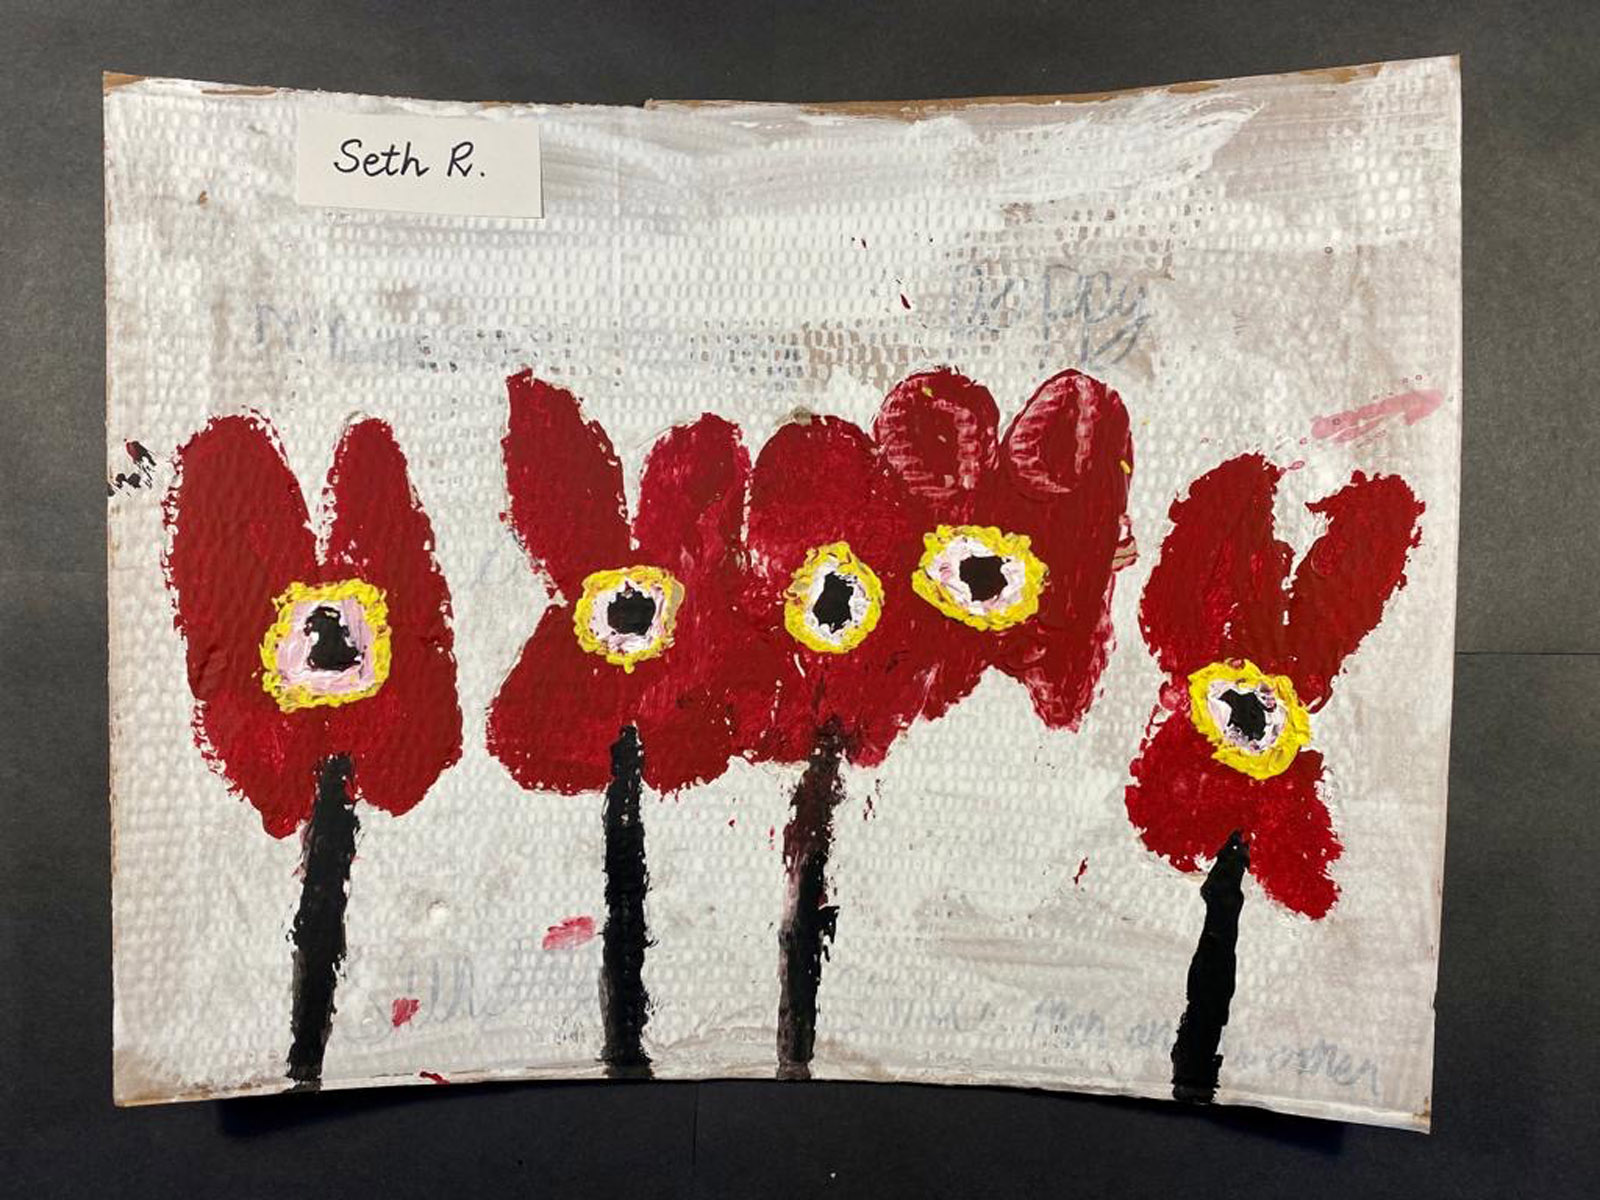 Poppies by Seth R from P4 at Rhu Primary